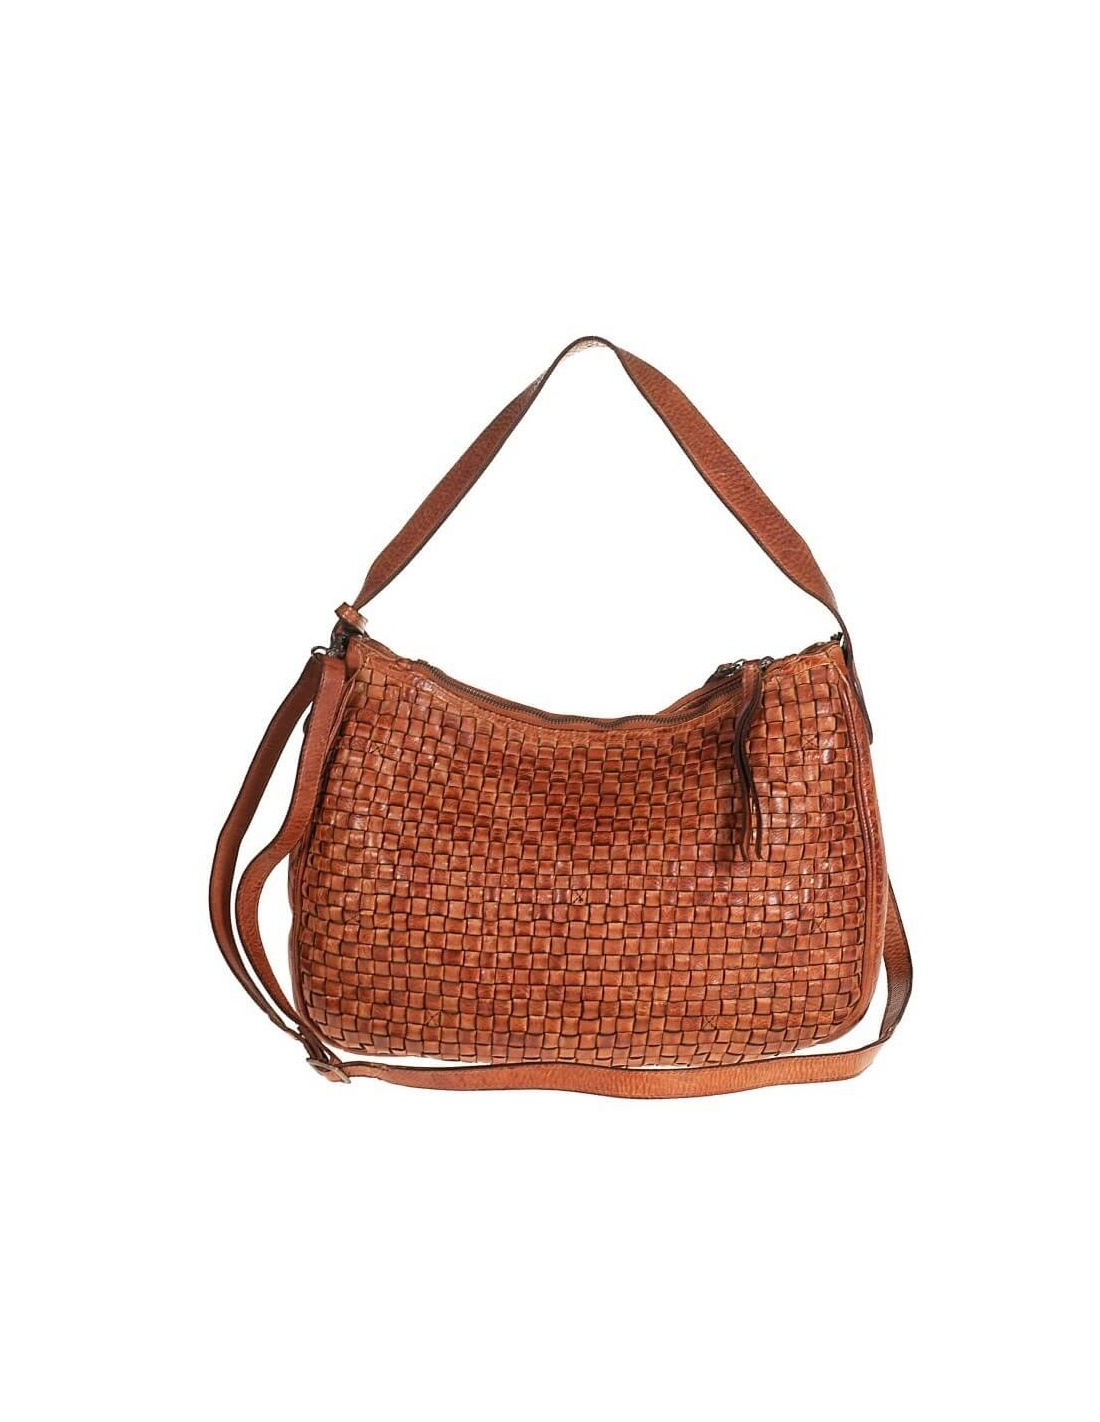 Italian Handmade Leather Bags for Woman L L Elegant Leather Tote from Florence, Made in Italy